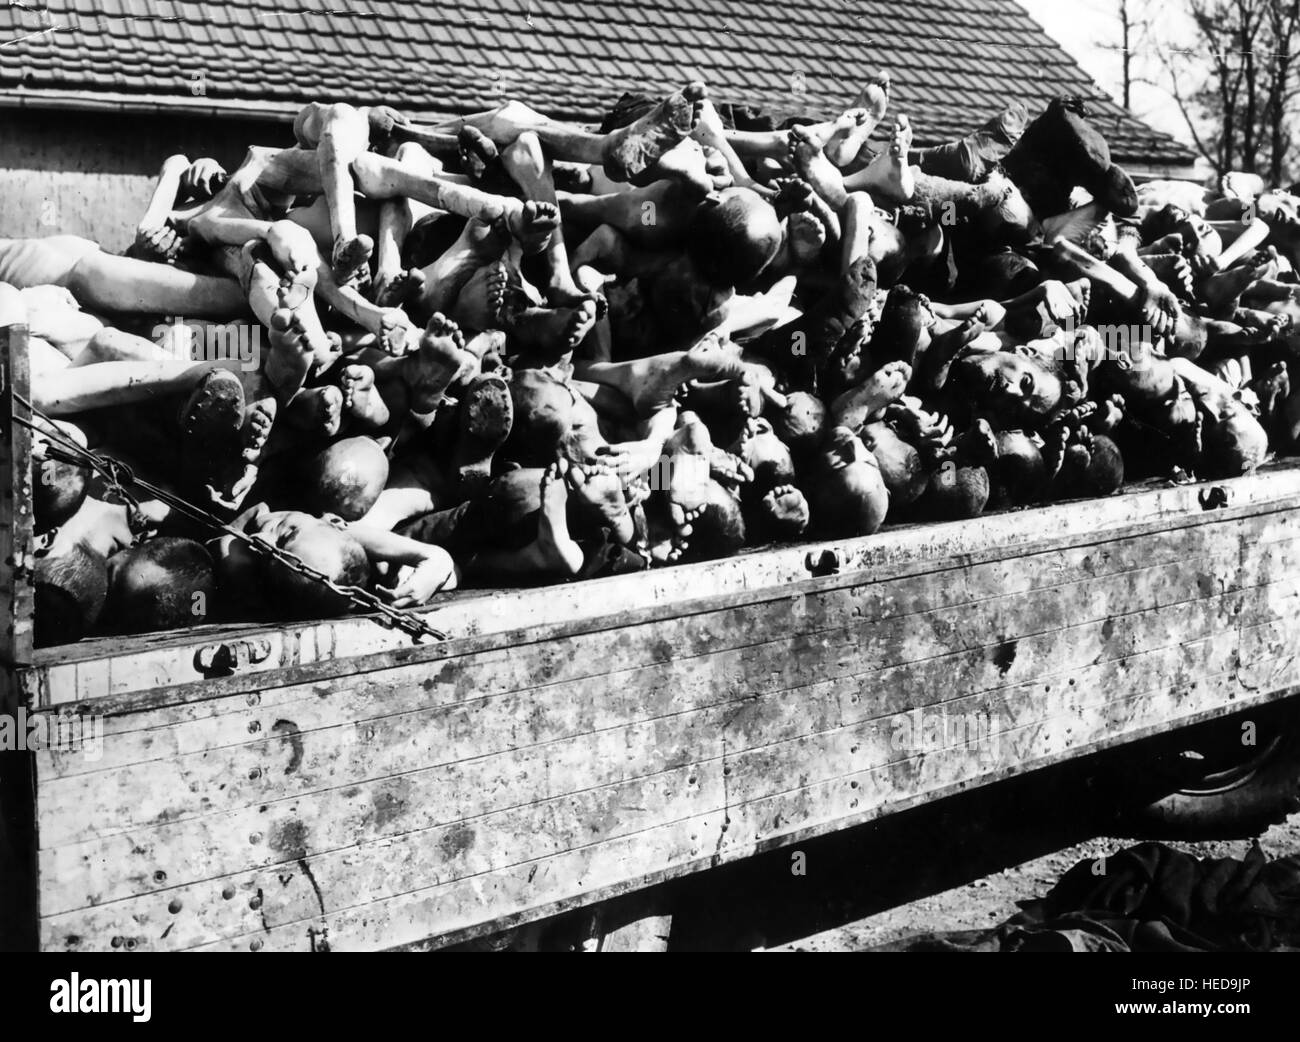 BUCHENWALD CONCENTRATION CAMP after liberation by American forces in April 1945. Photo: US Official Stock Photo